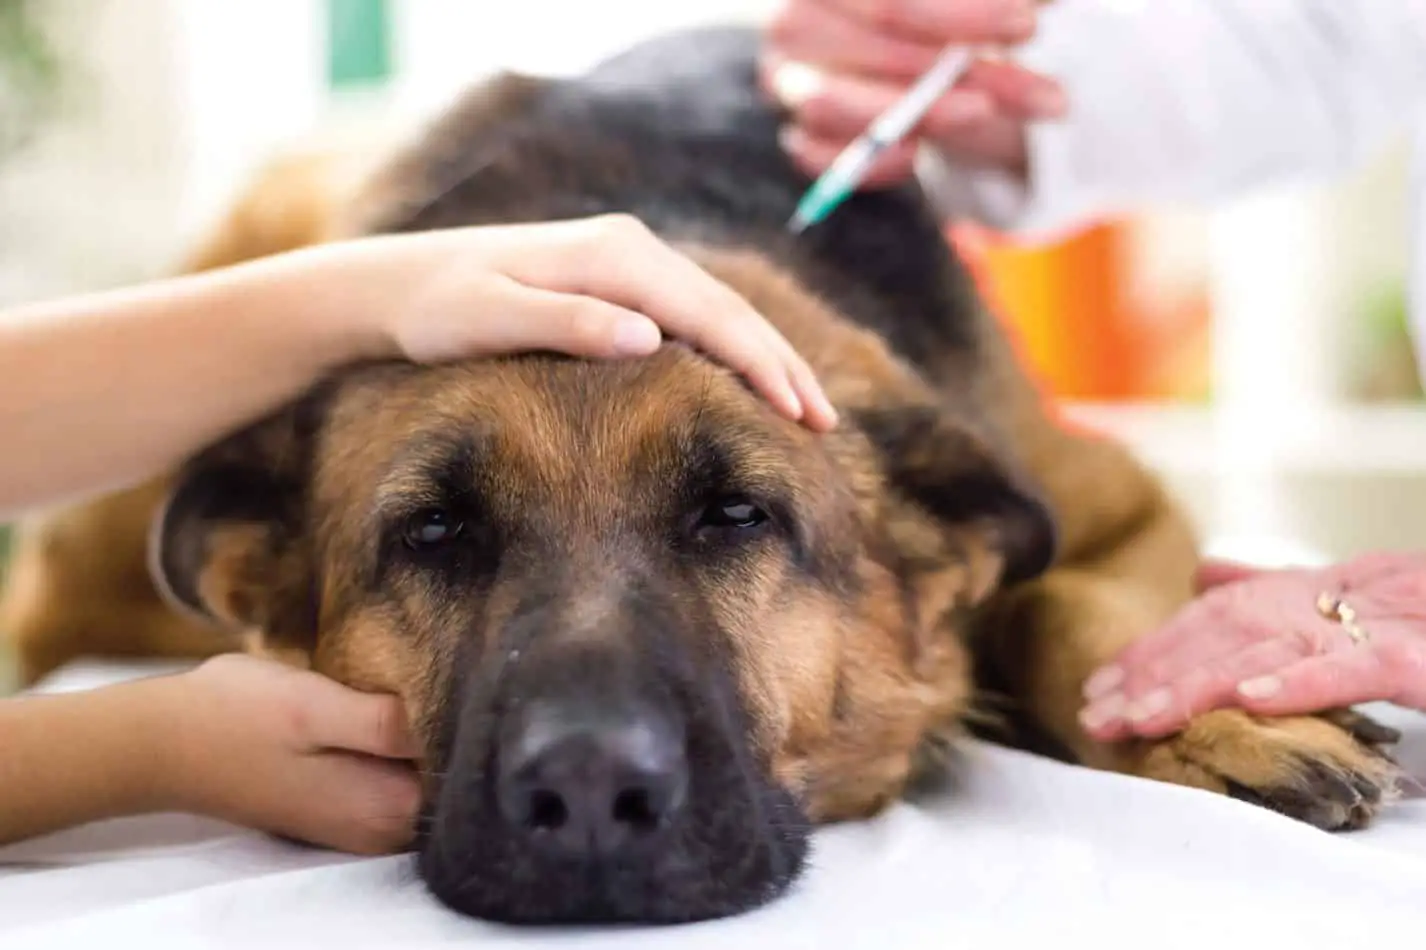 The symptoms of kennel cough in dogs